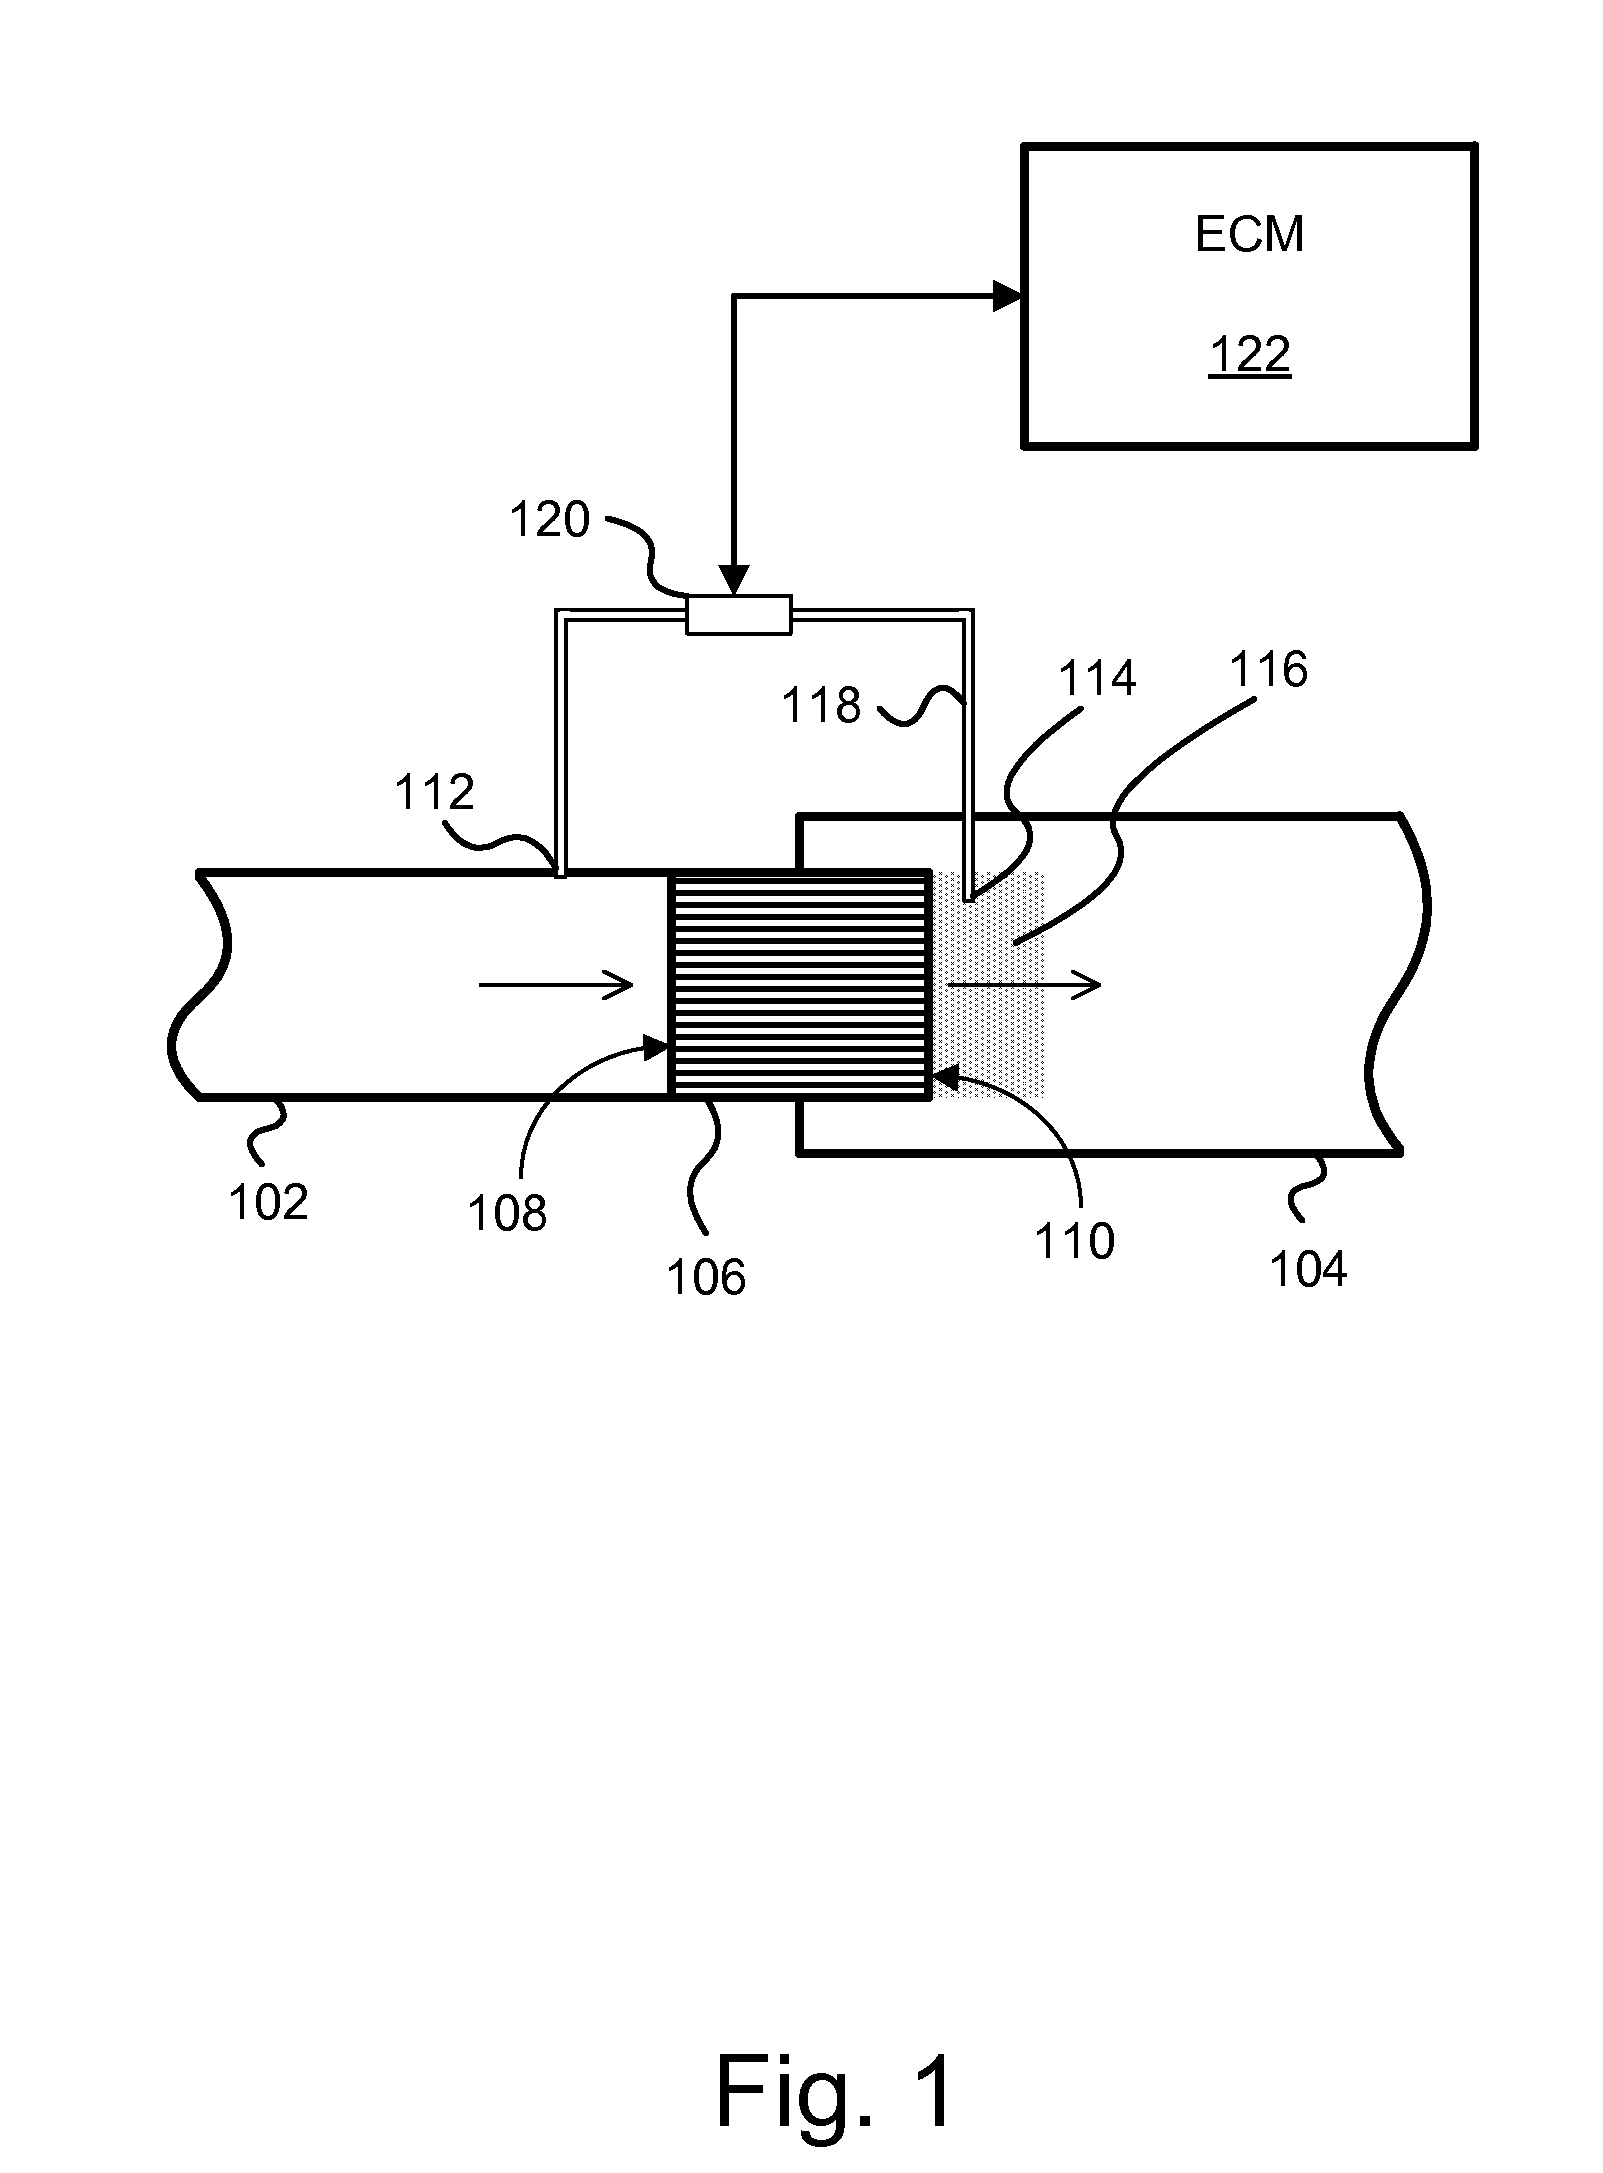 Apparatus, system, and method for differential pressure measurement across a conduit flow area change